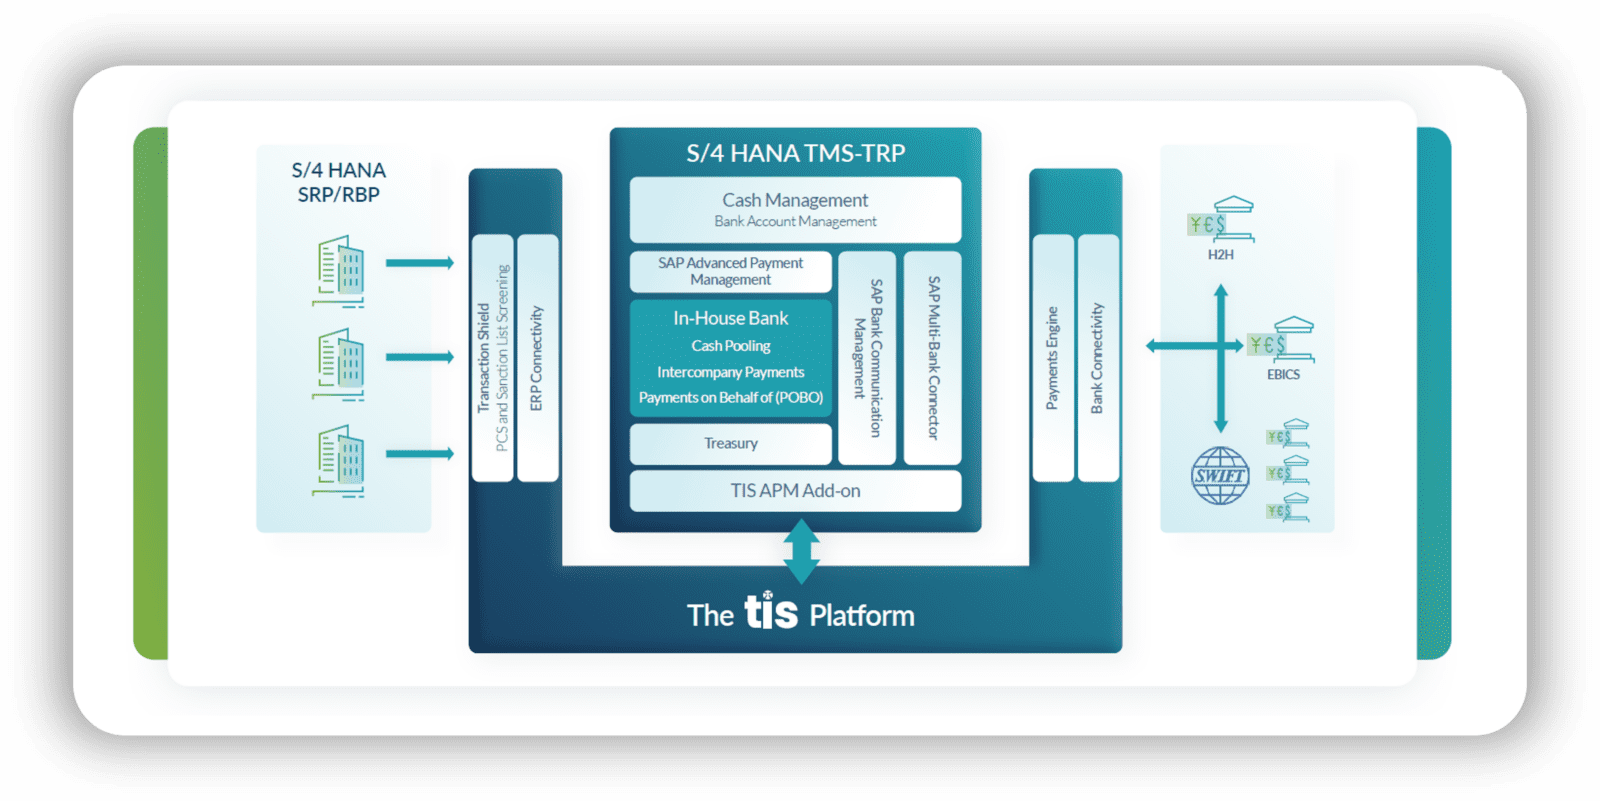 The structure deployed by TIS to help integrate client ERP / SAP instances with the rest of their global banking and back-office solution environment. 